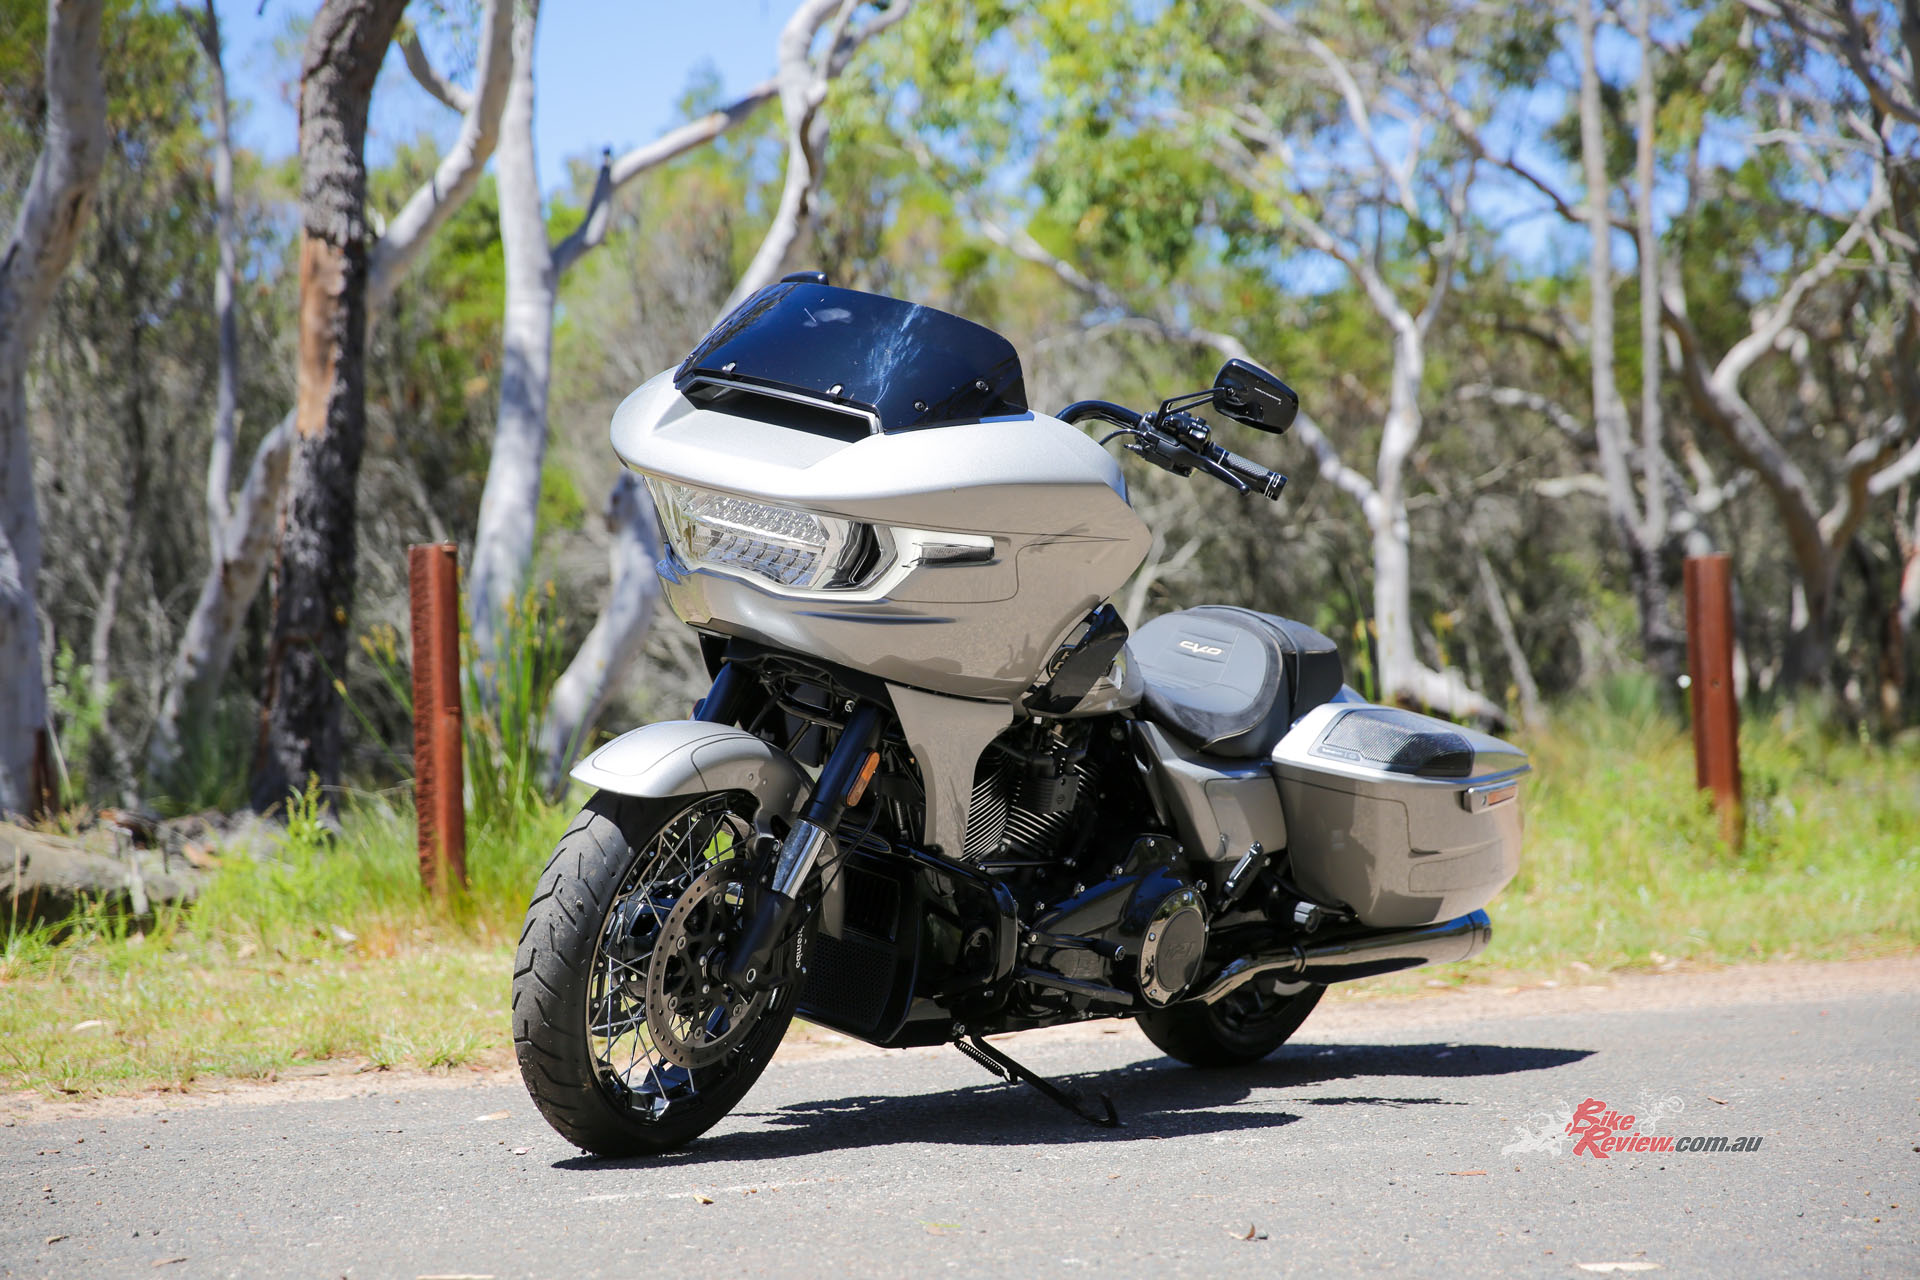 In terms of styling, the CVO Road Glide certainly does something for me. That gorgeous frame-mounted fairing is dressed in the finest LED lights, running down to those little details like the subtle winglets and adjustable vents.